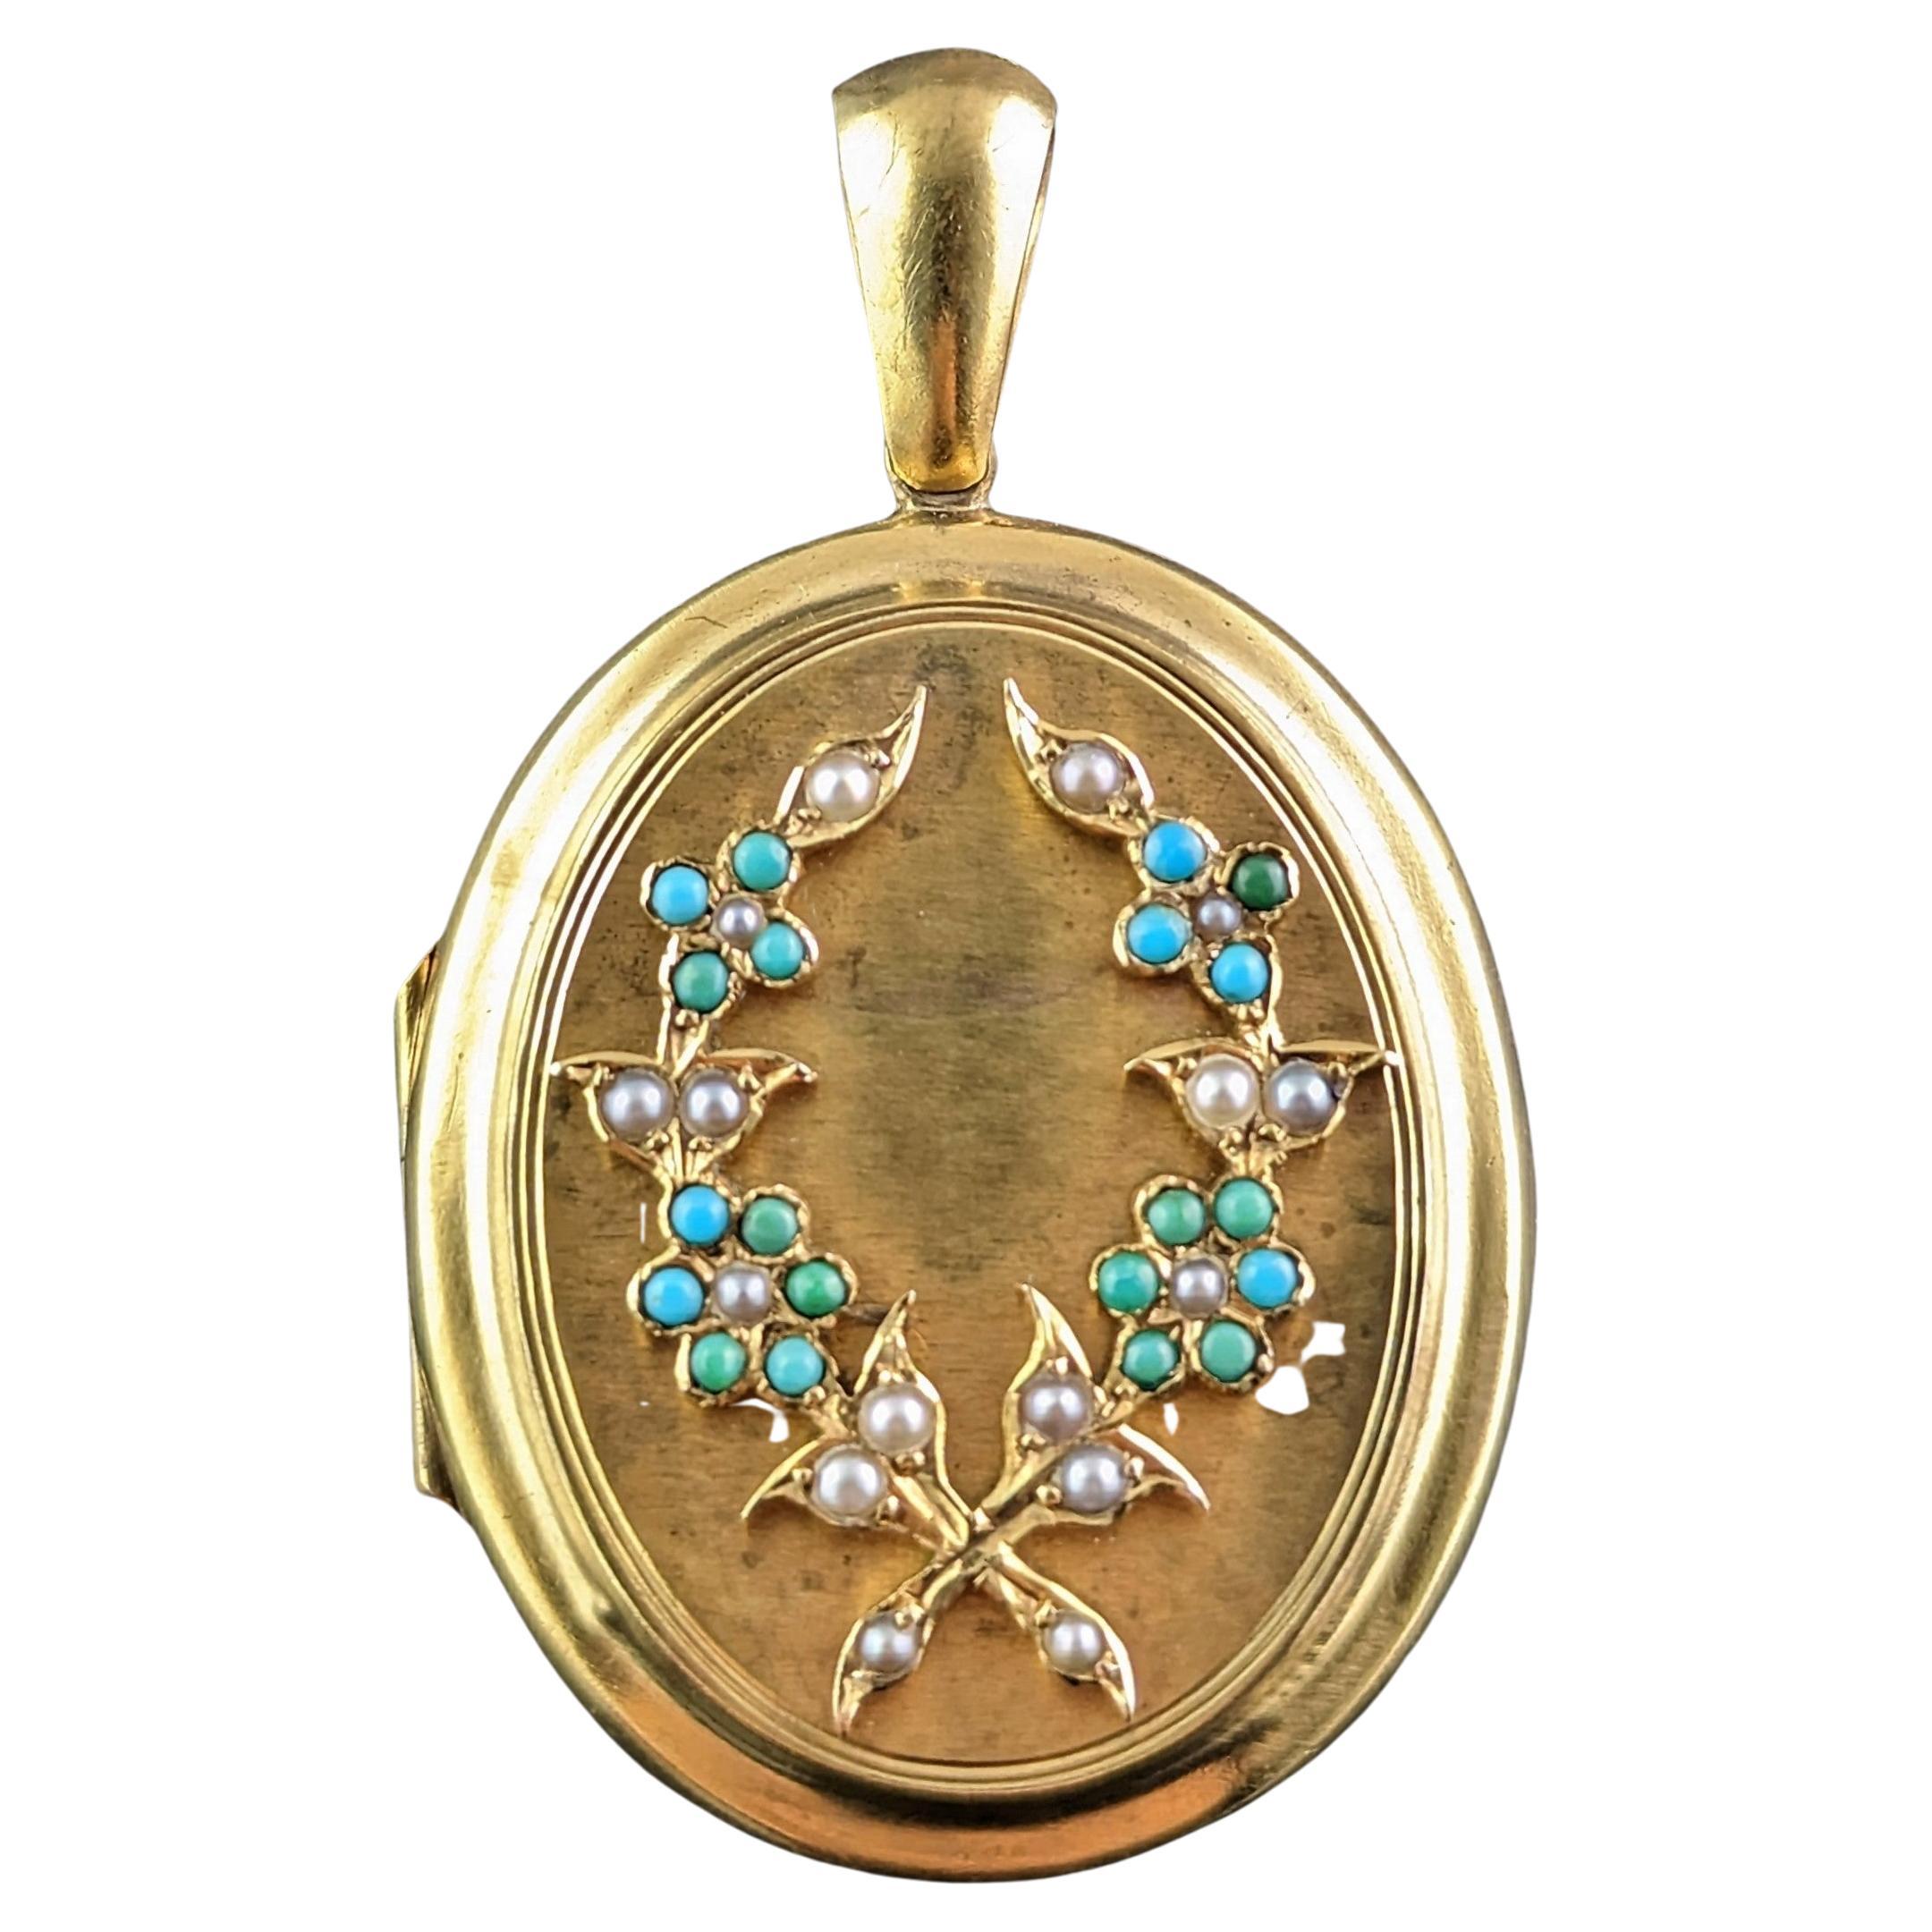 Antique 15k Gold Locket, Turquoise and Pearl, Portrait, Forget Me Not